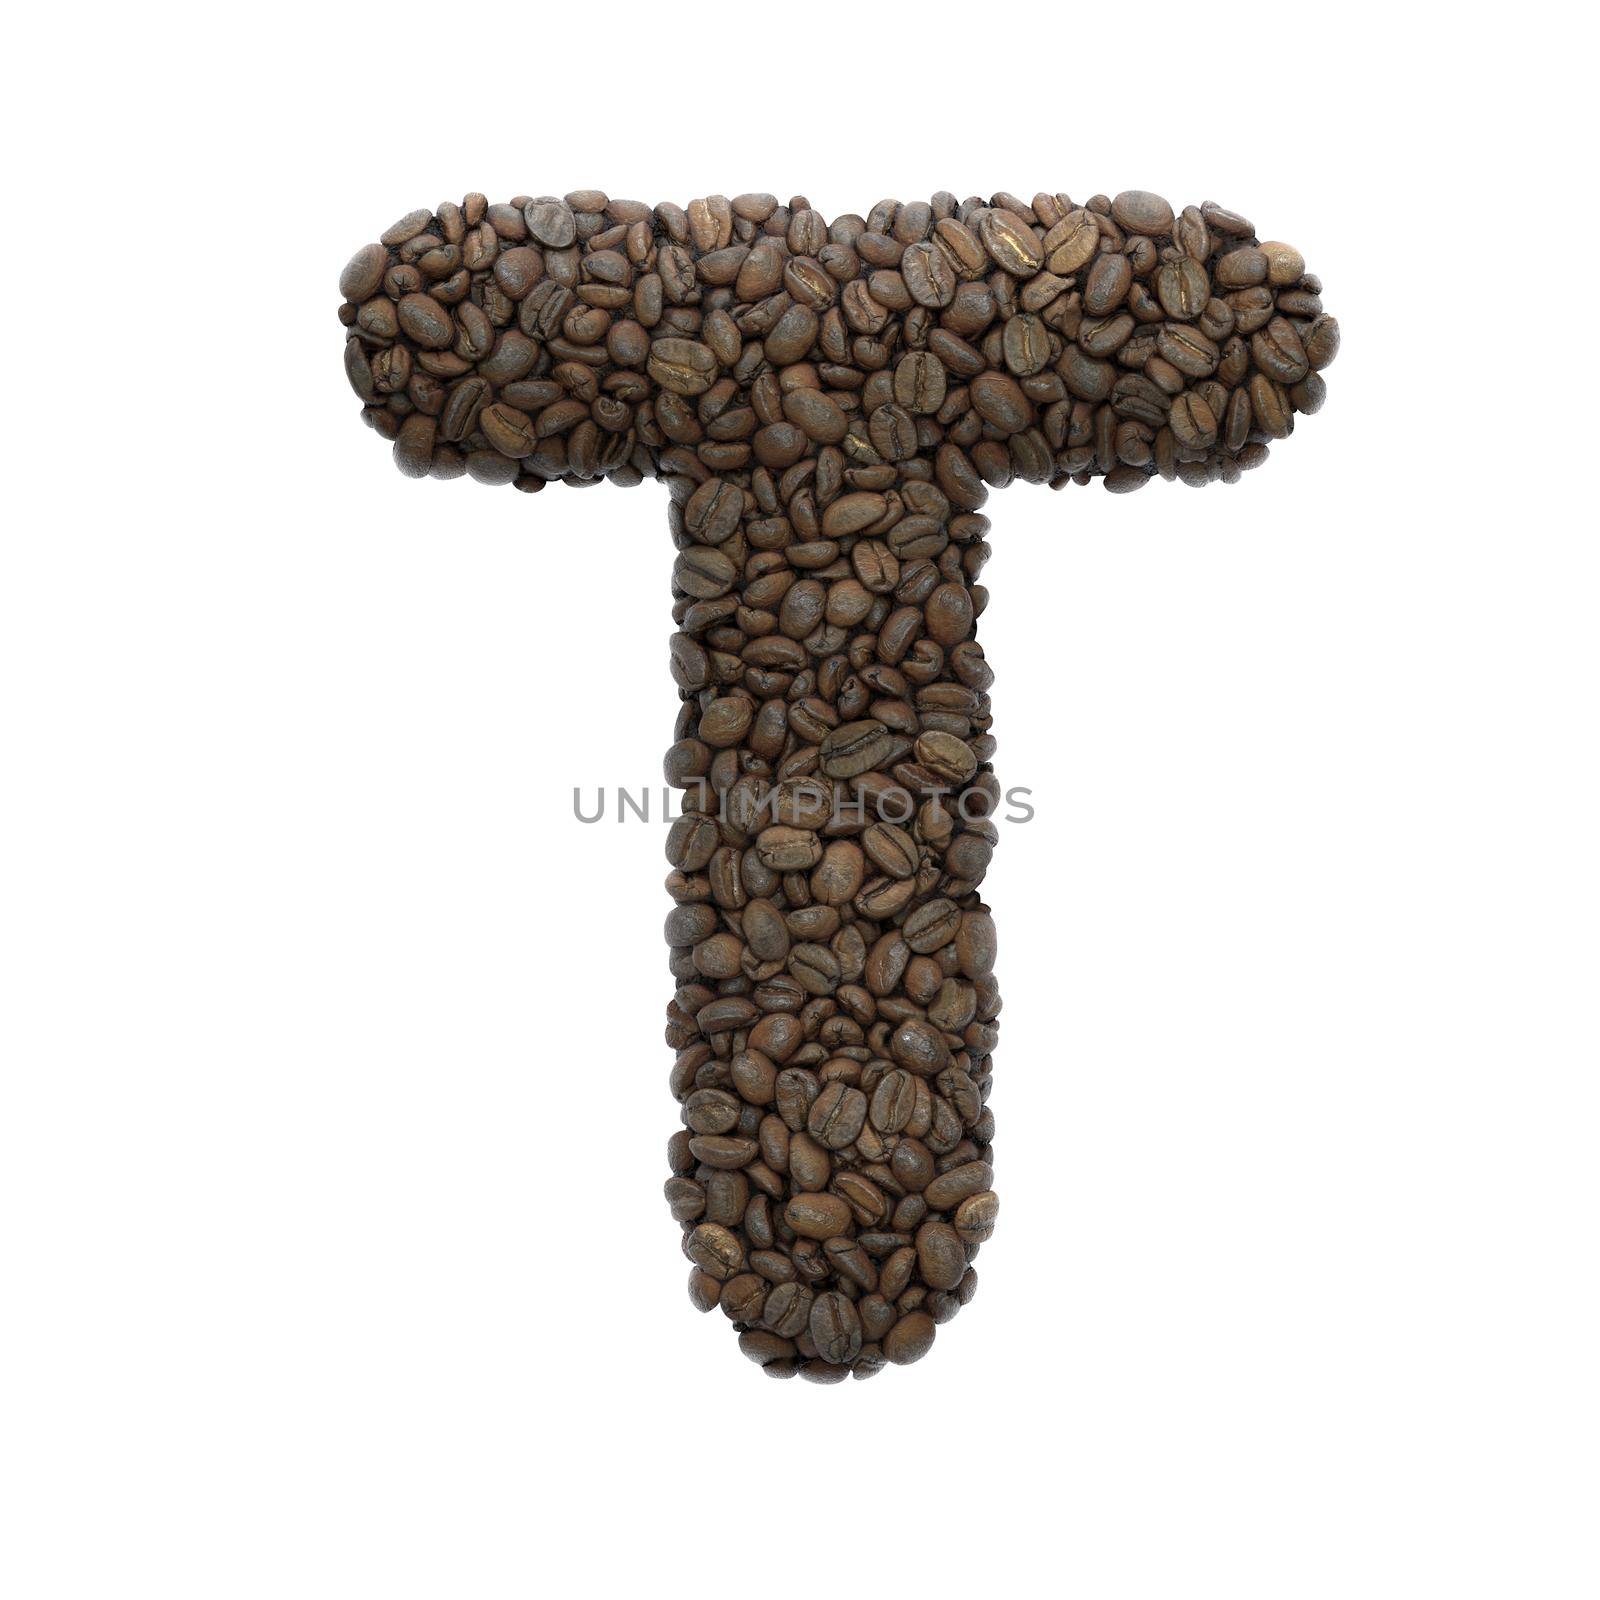 Coffee letter T - Capital 3d roasted beans font isolated on white background. This alphabet is perfect for creative illustrations related but not limited to Coffee, energy, insomnia...